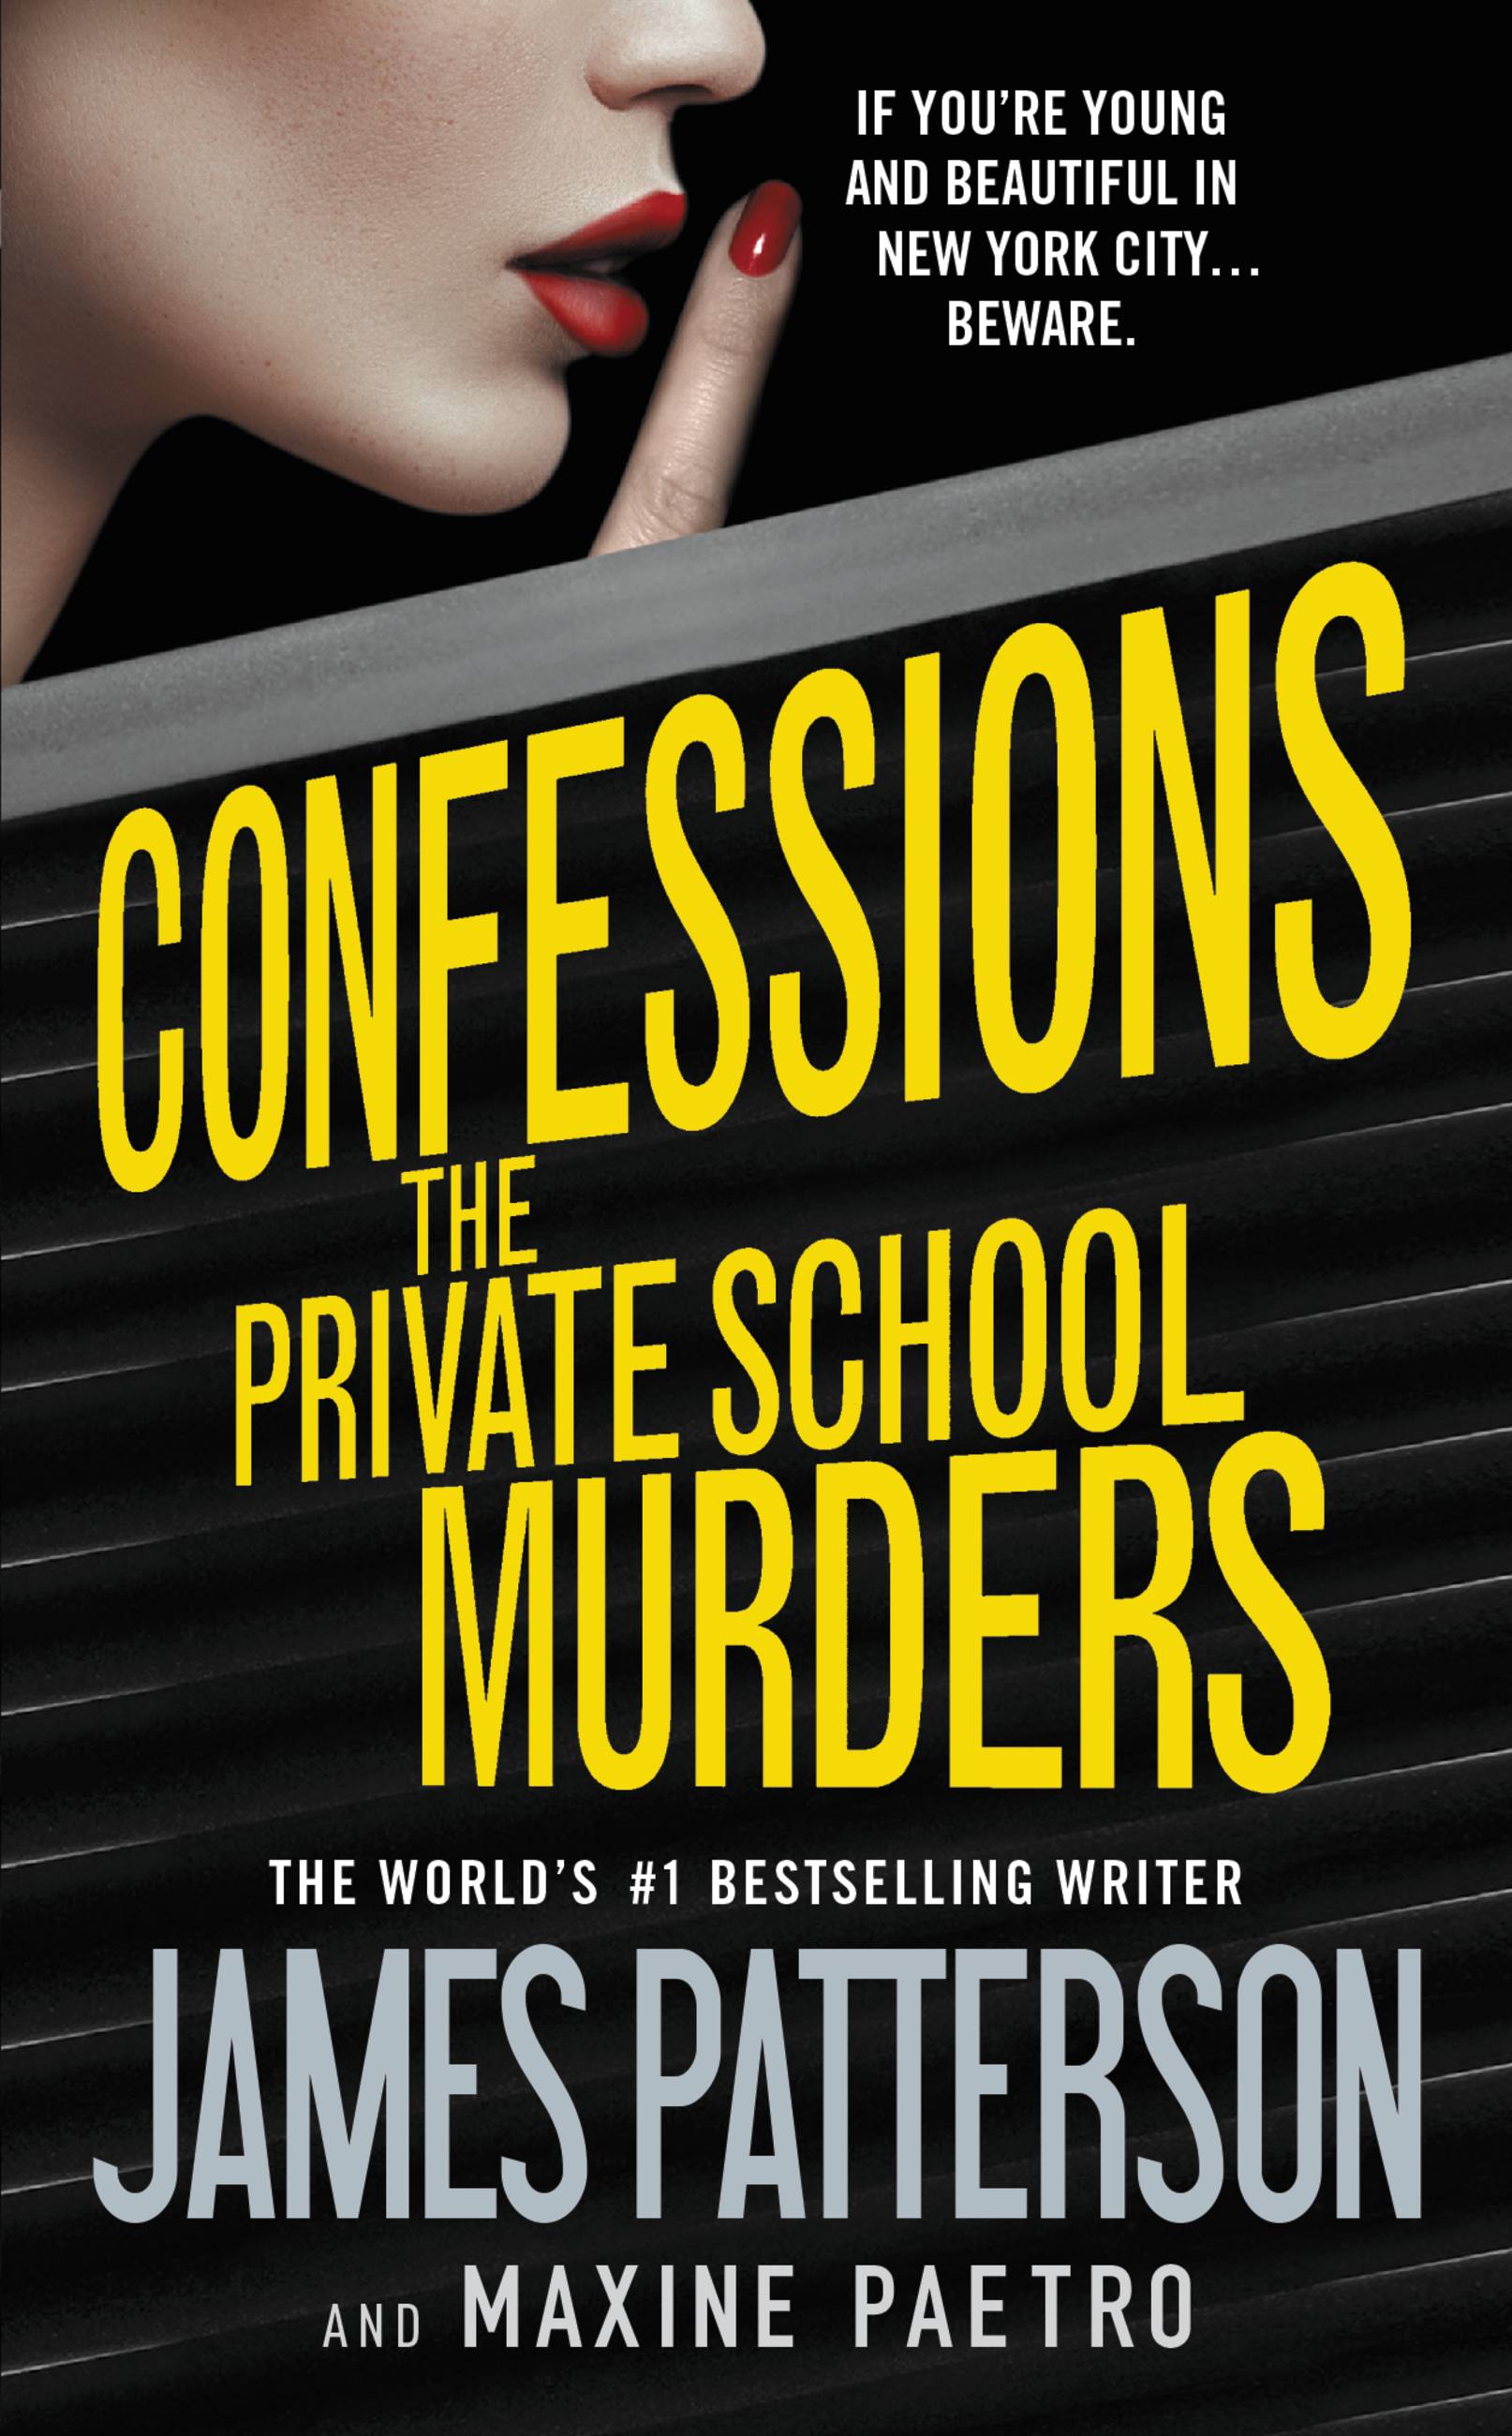 Cover Image of Confessions: The Private School Murders